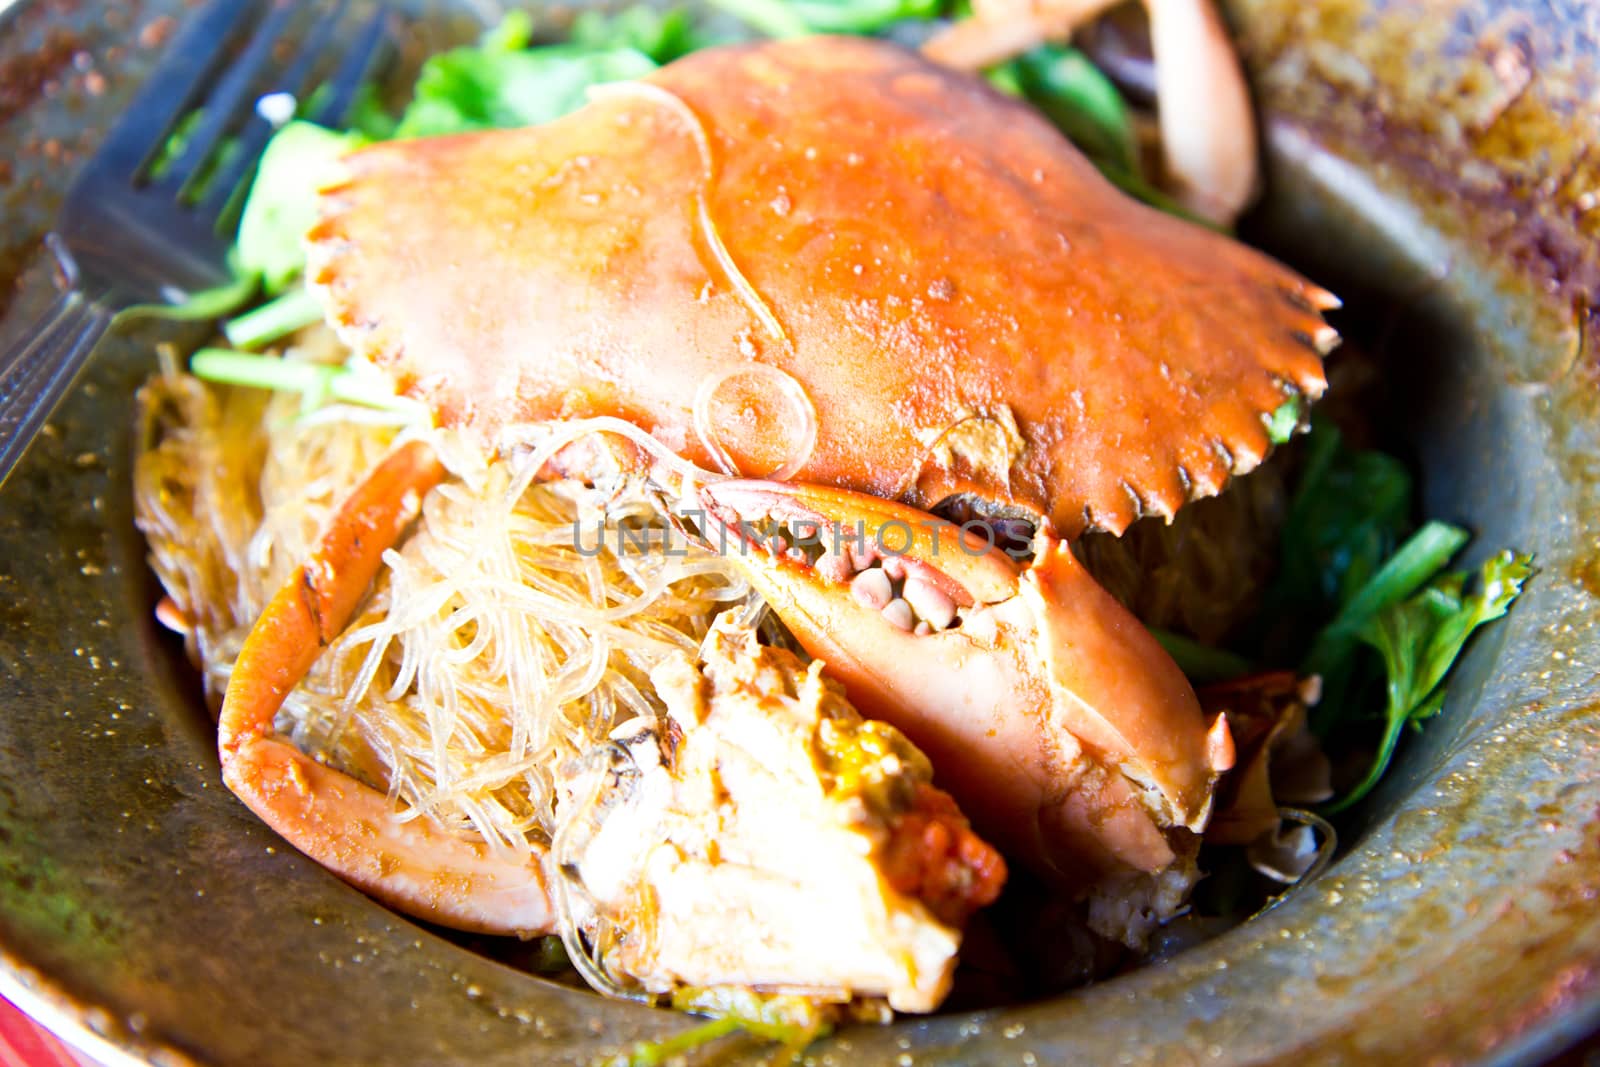 Stream big crab with vermicelli and herb by tisskananat